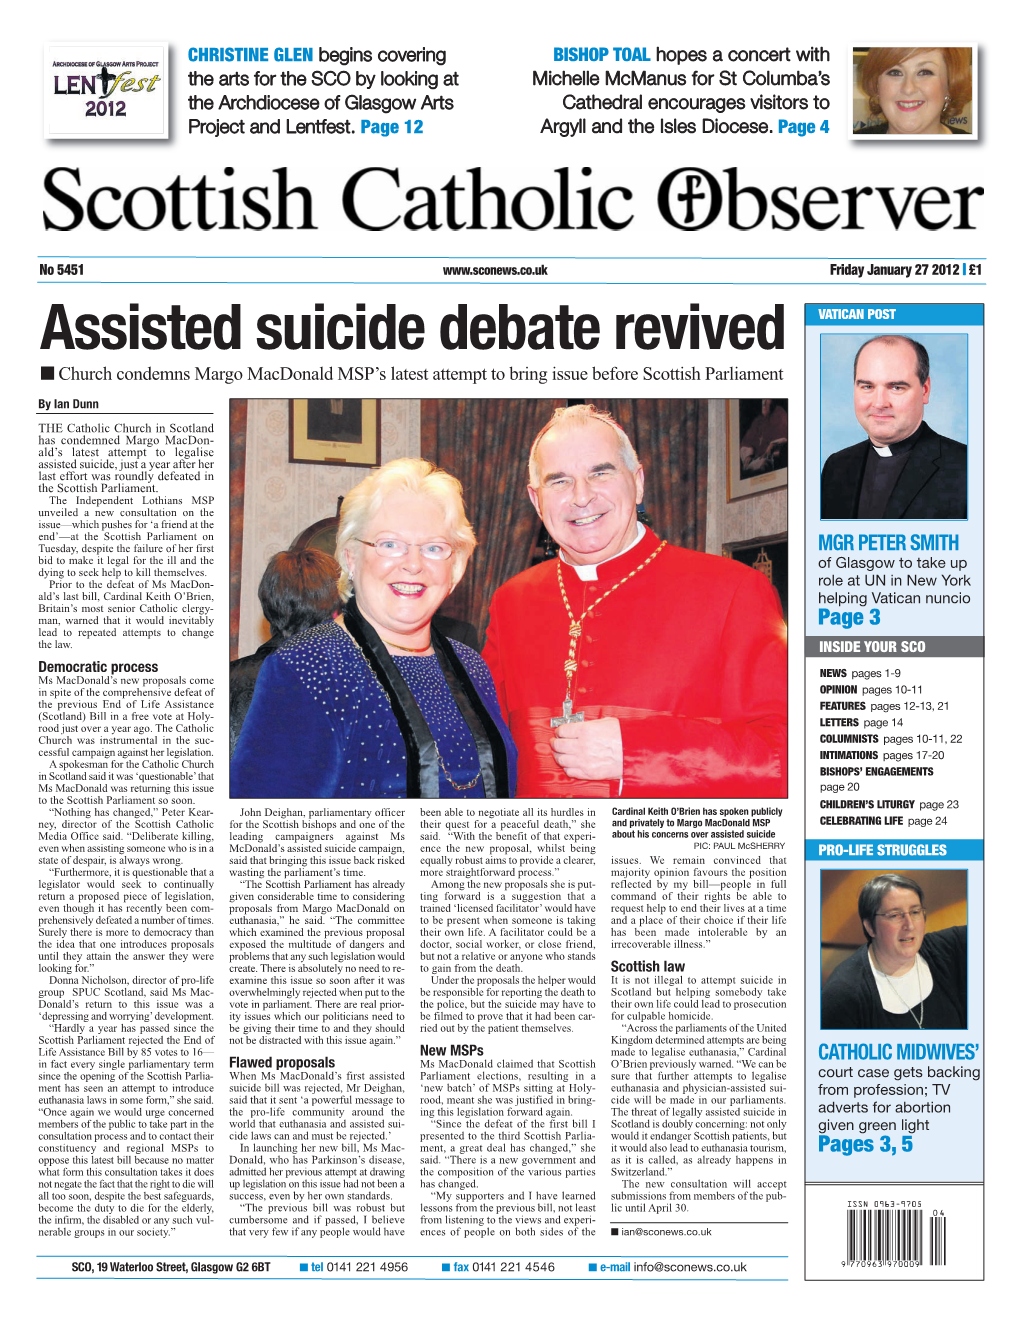 Assisted Suicide Debate Revived VATICAN POST I Church Condemns Margo Macdonald MSP’S Latest Attempt to Bring Issue Before Scottish Parliament by Ian Dunn